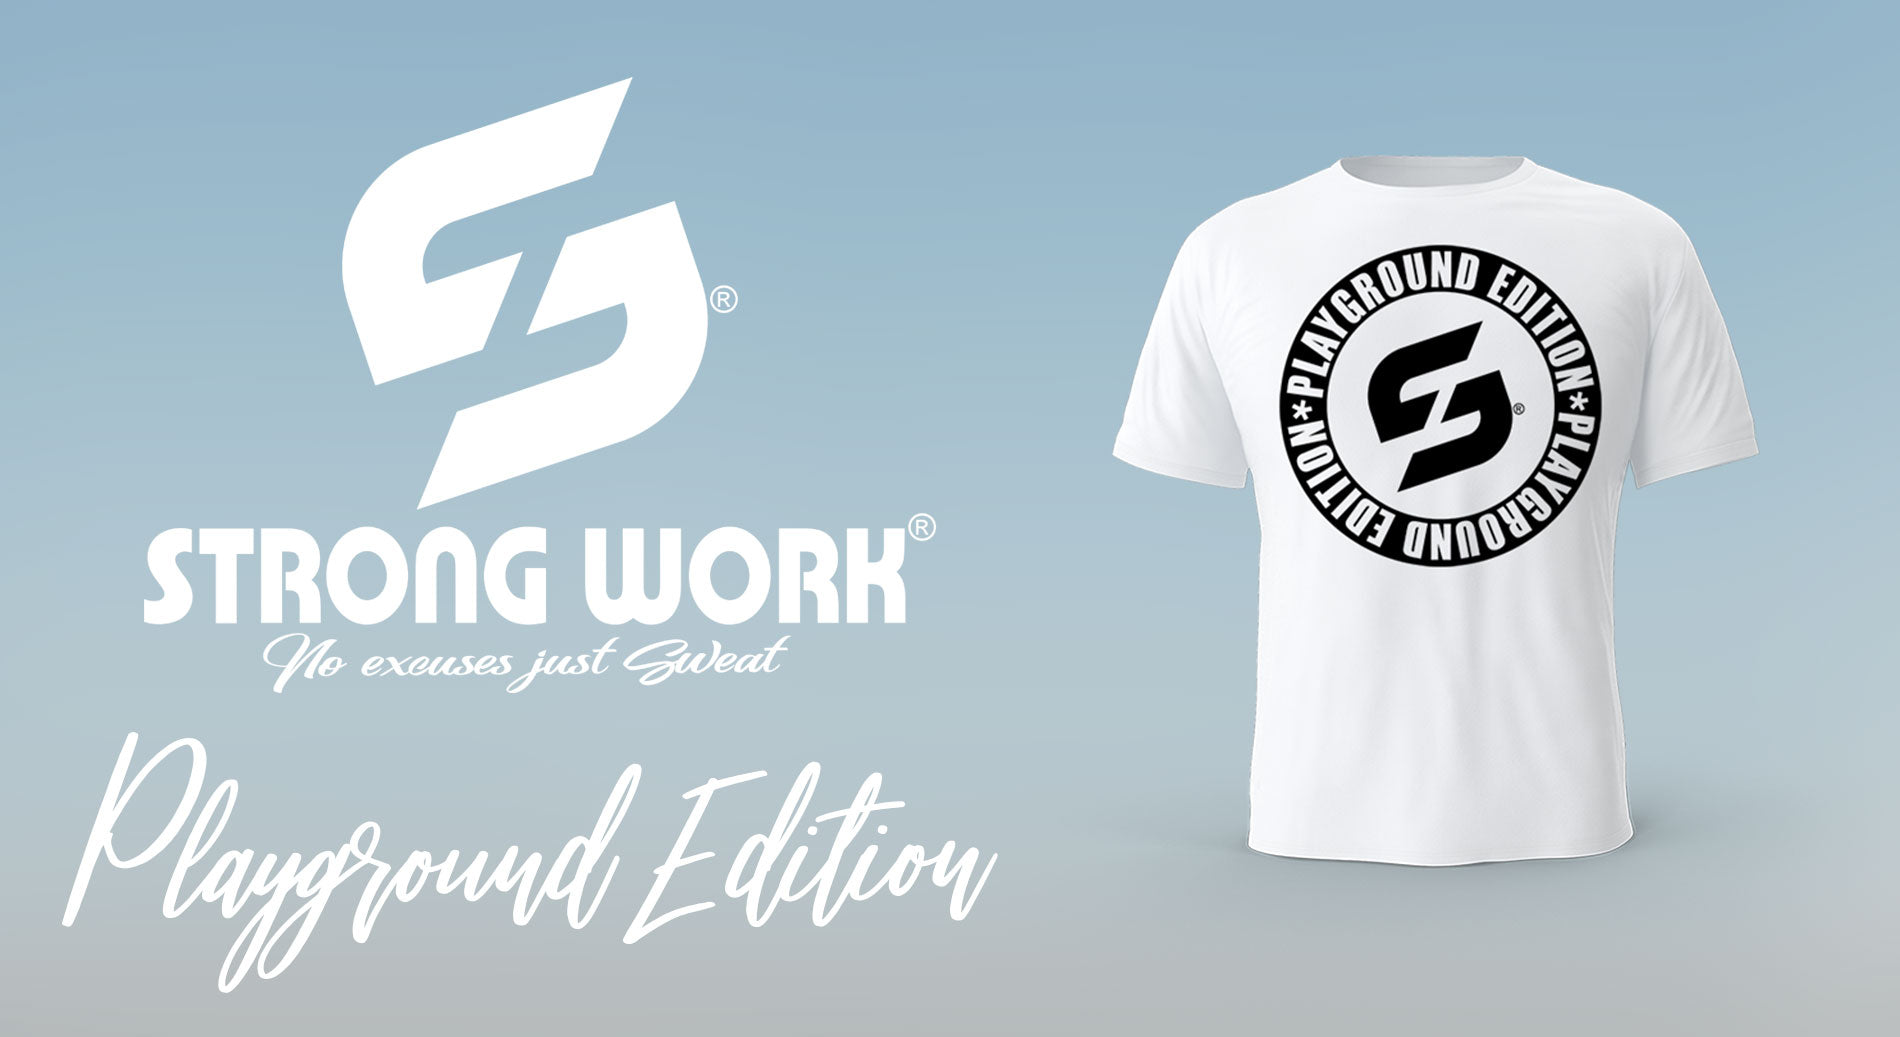 STRONG WORK SPORTSWEAR - PLAYGROUND T-SHIRT FOR WOMEN - SUSTAINABLE AND ORGANIC SPORTSWEAR